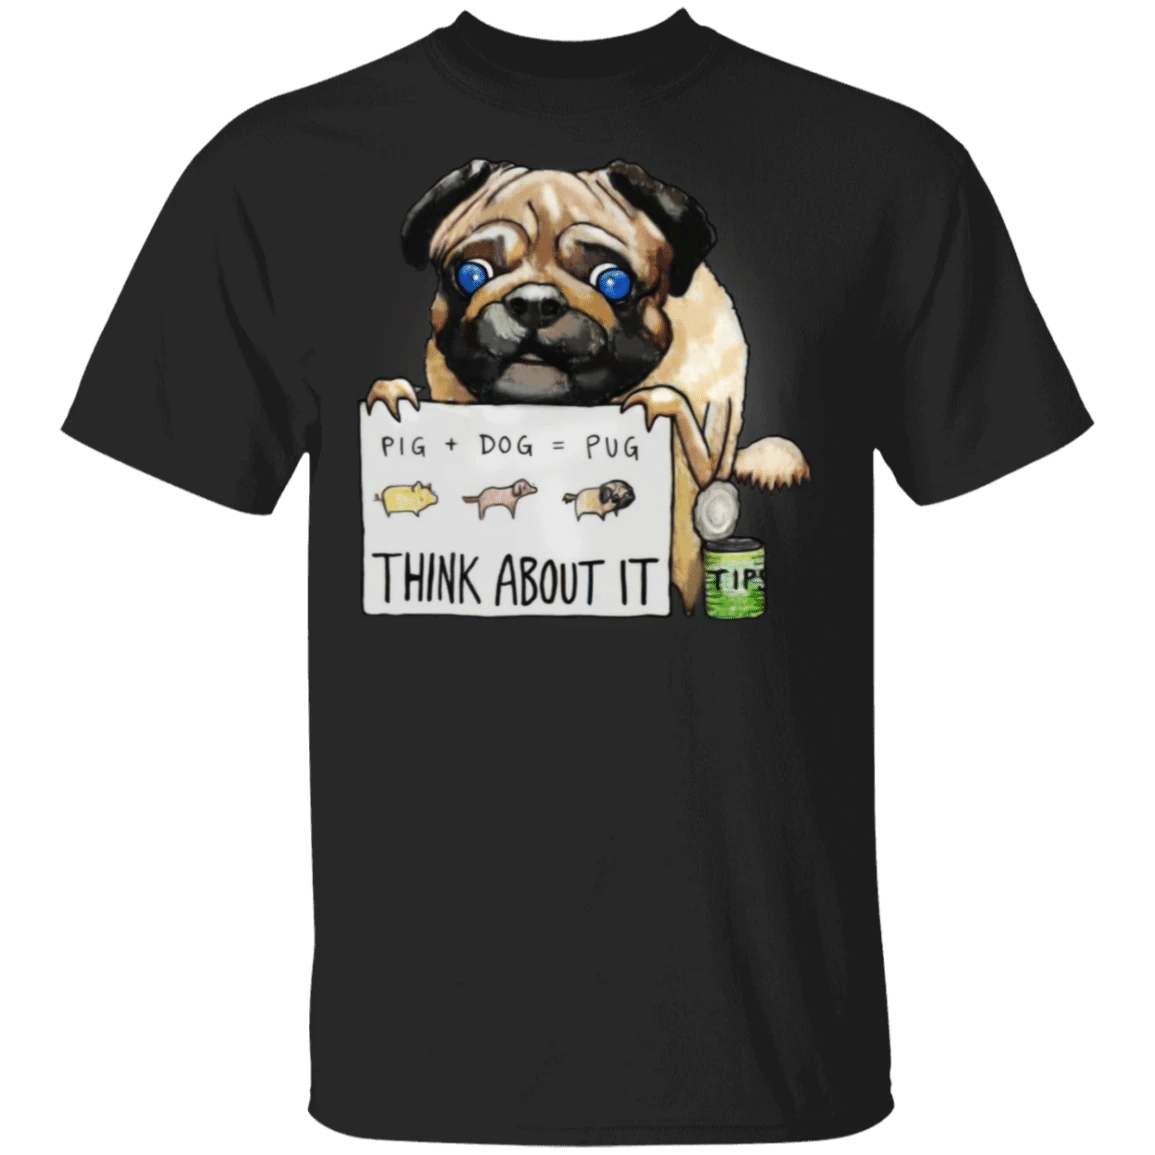 Pug Pig Dog Pug Think About It T-Shirt Funny Shirt Gifts For Friends